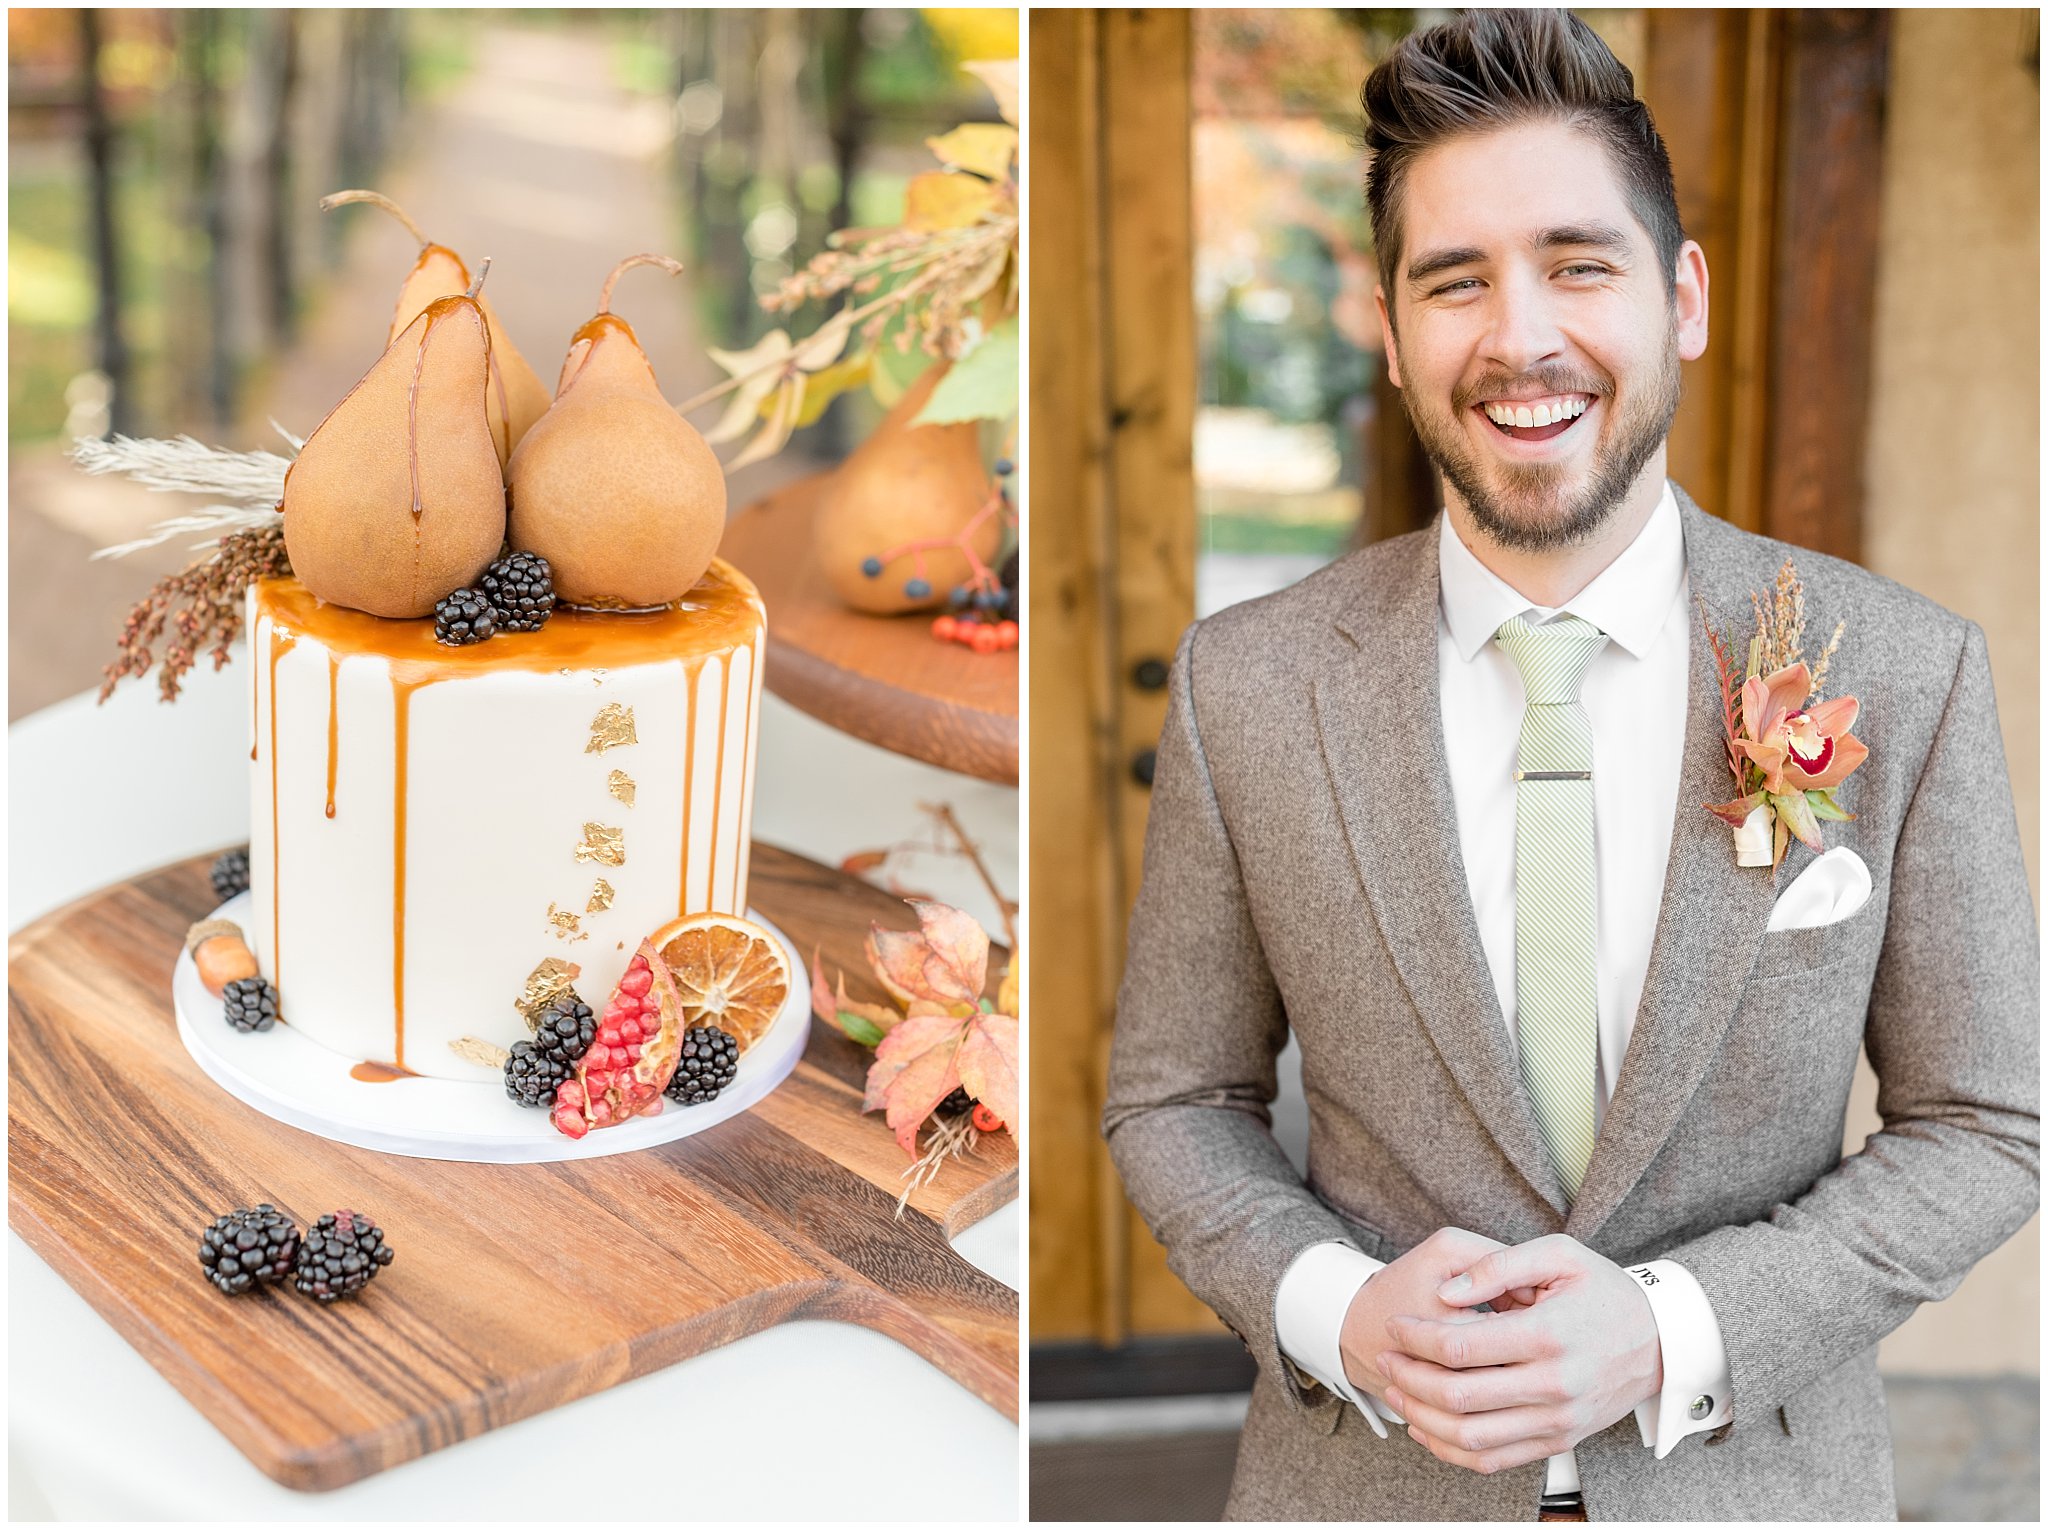 Custom fitted light brown suit with green tie | fall wedding cake with caramel and pears | Jessie and Dallin Photography